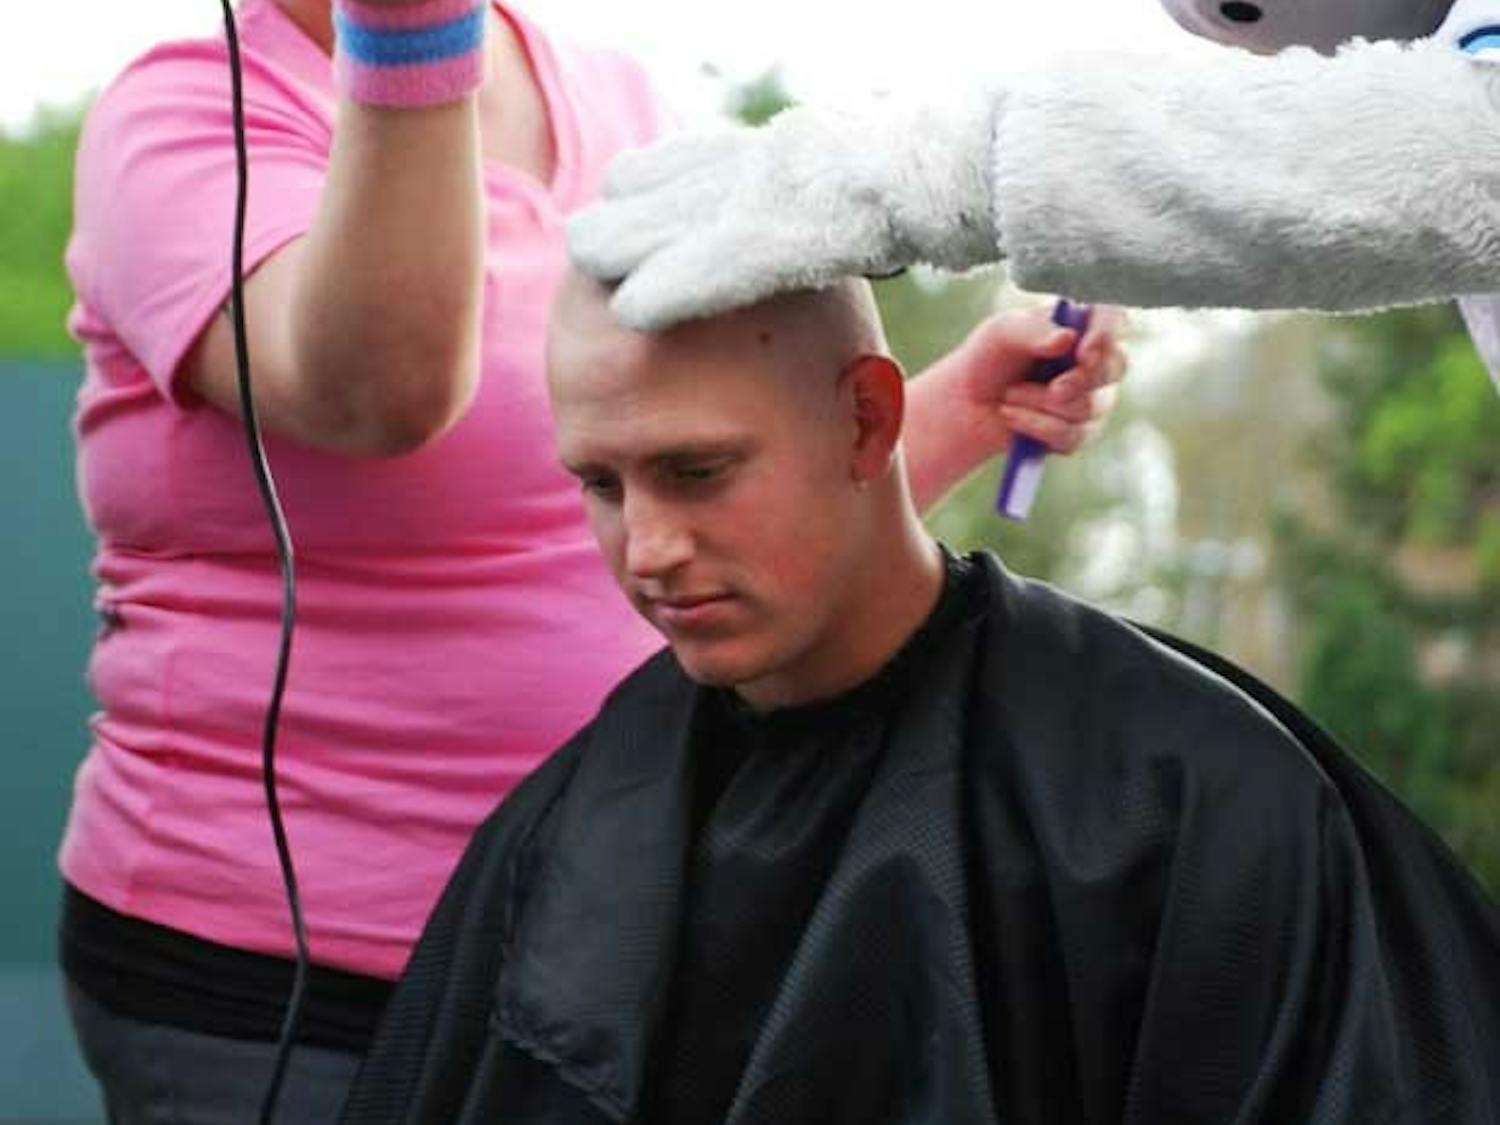 Senior 1st Baseman Jesse Wierzbicki gets his head shaved during BaseBald for the Cure. The event, which raised over $13,000 was organized by Tar Heel bullpen catcher and cancer survivor Chase Jones to raise money for pediatric oncology.